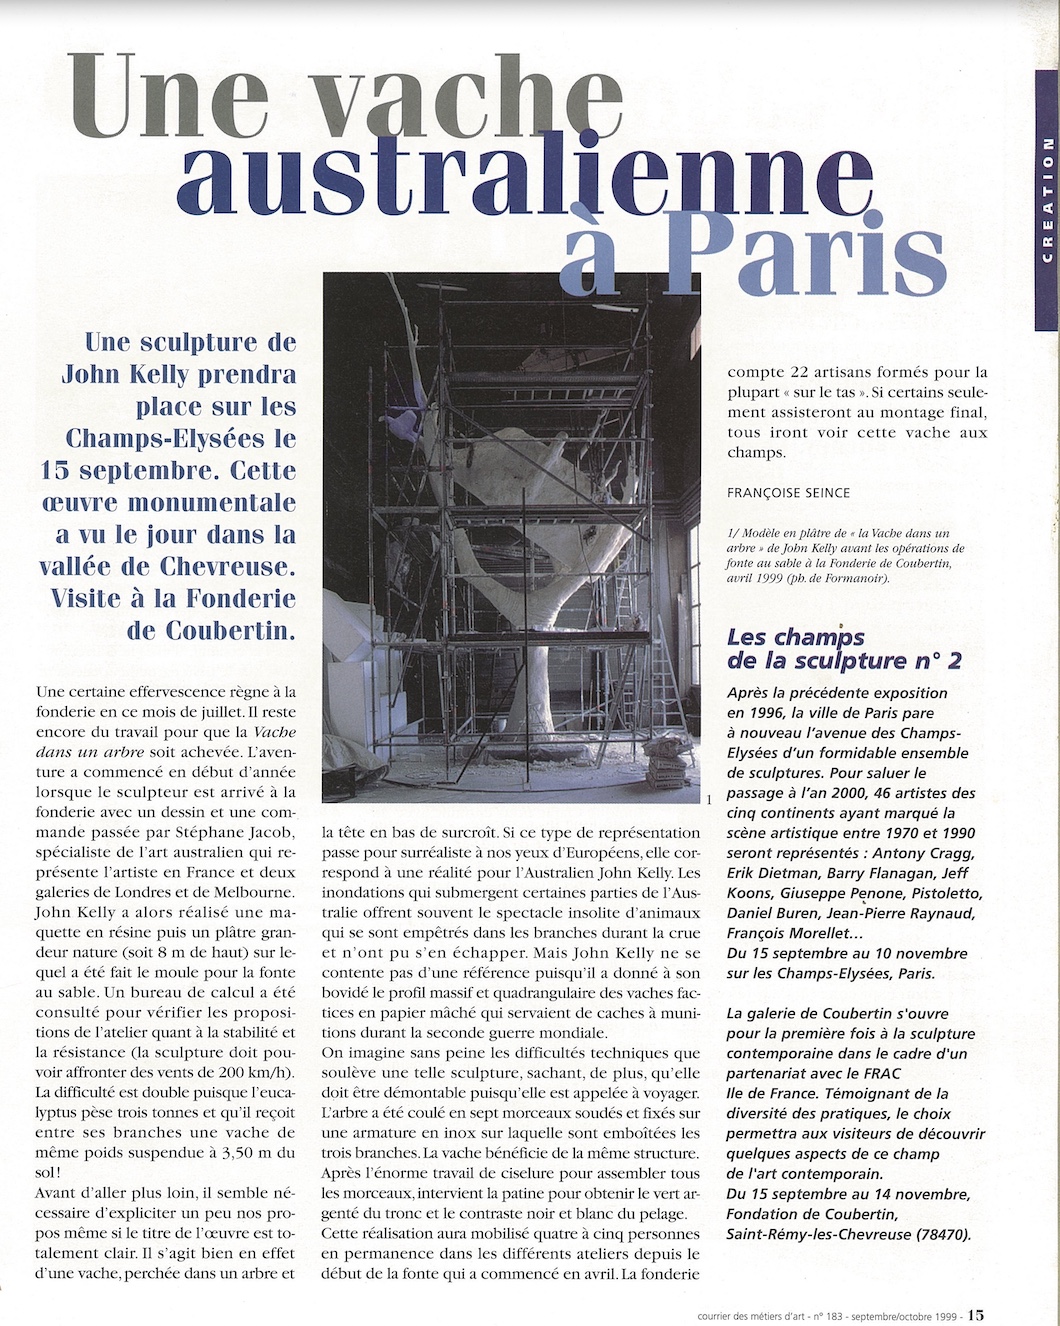 Françoise Seince, ‘Une vache australienne’, Courier des Métiers d’Art, no 183, sept / oct 1999; scan of a one-page article, which features text and an image of the sculpture in the Coubertin foundry